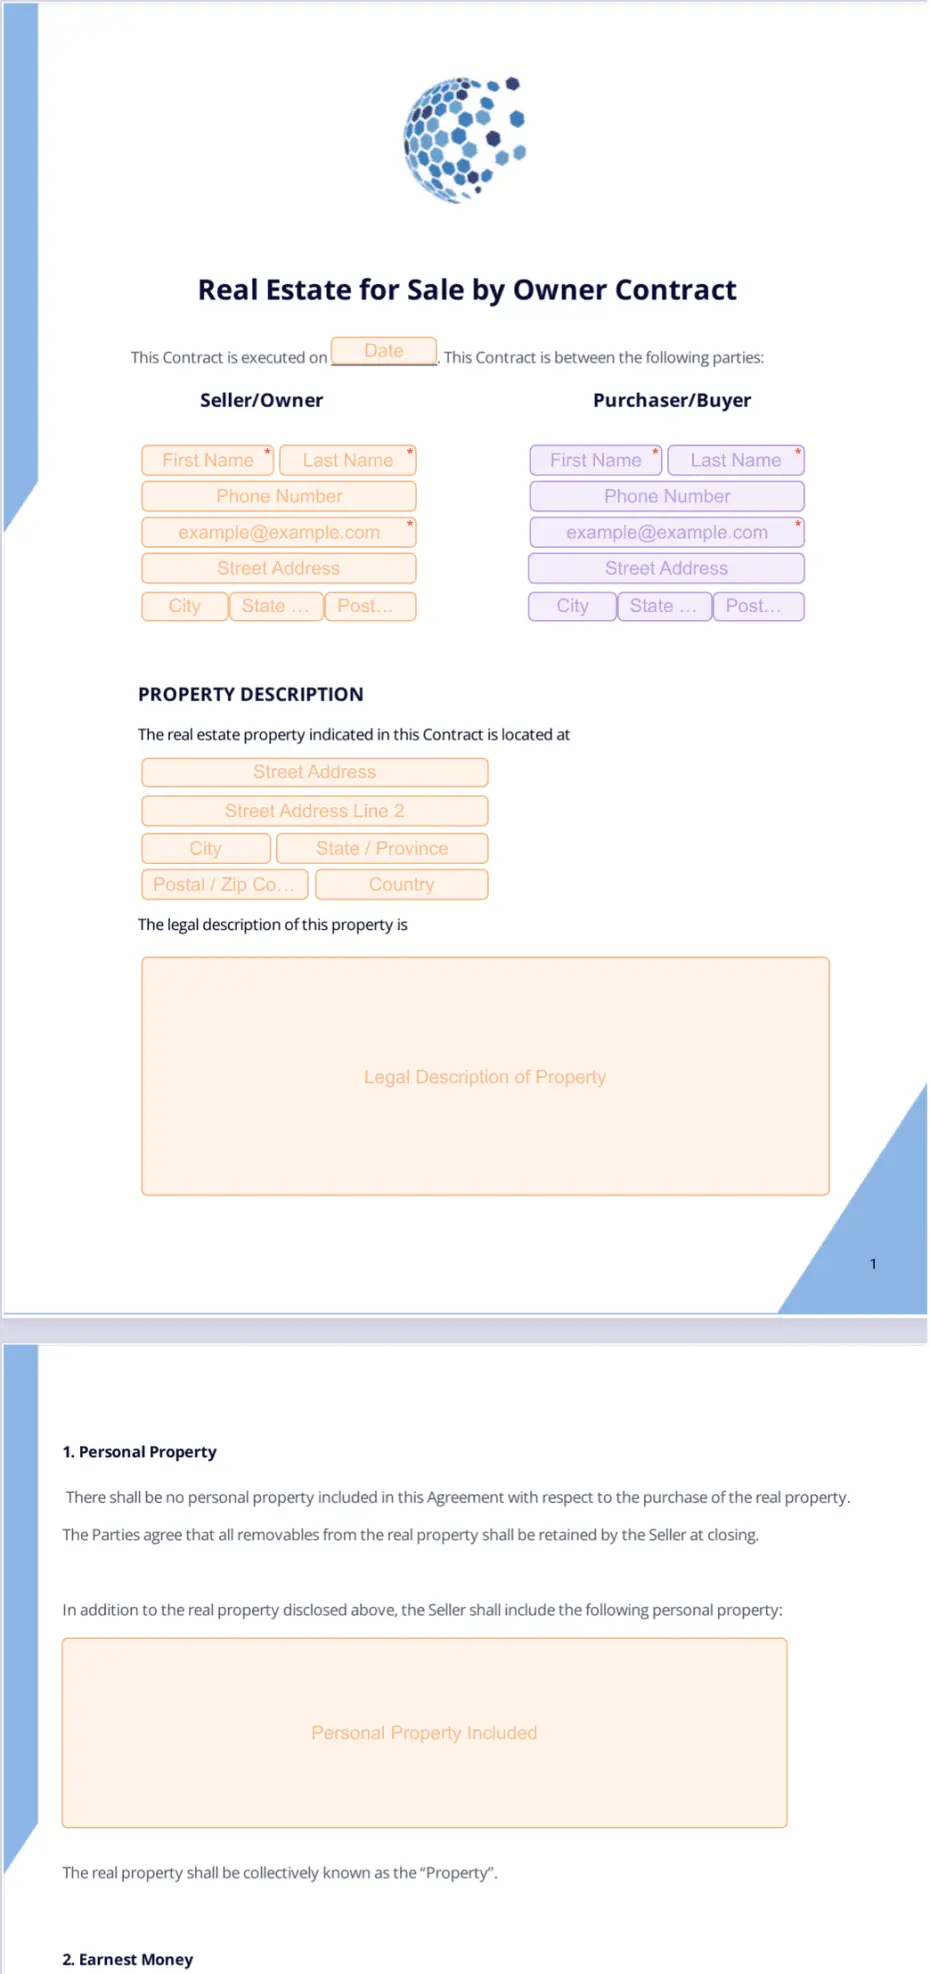 Real Estate for Sale by Owner Contract Template